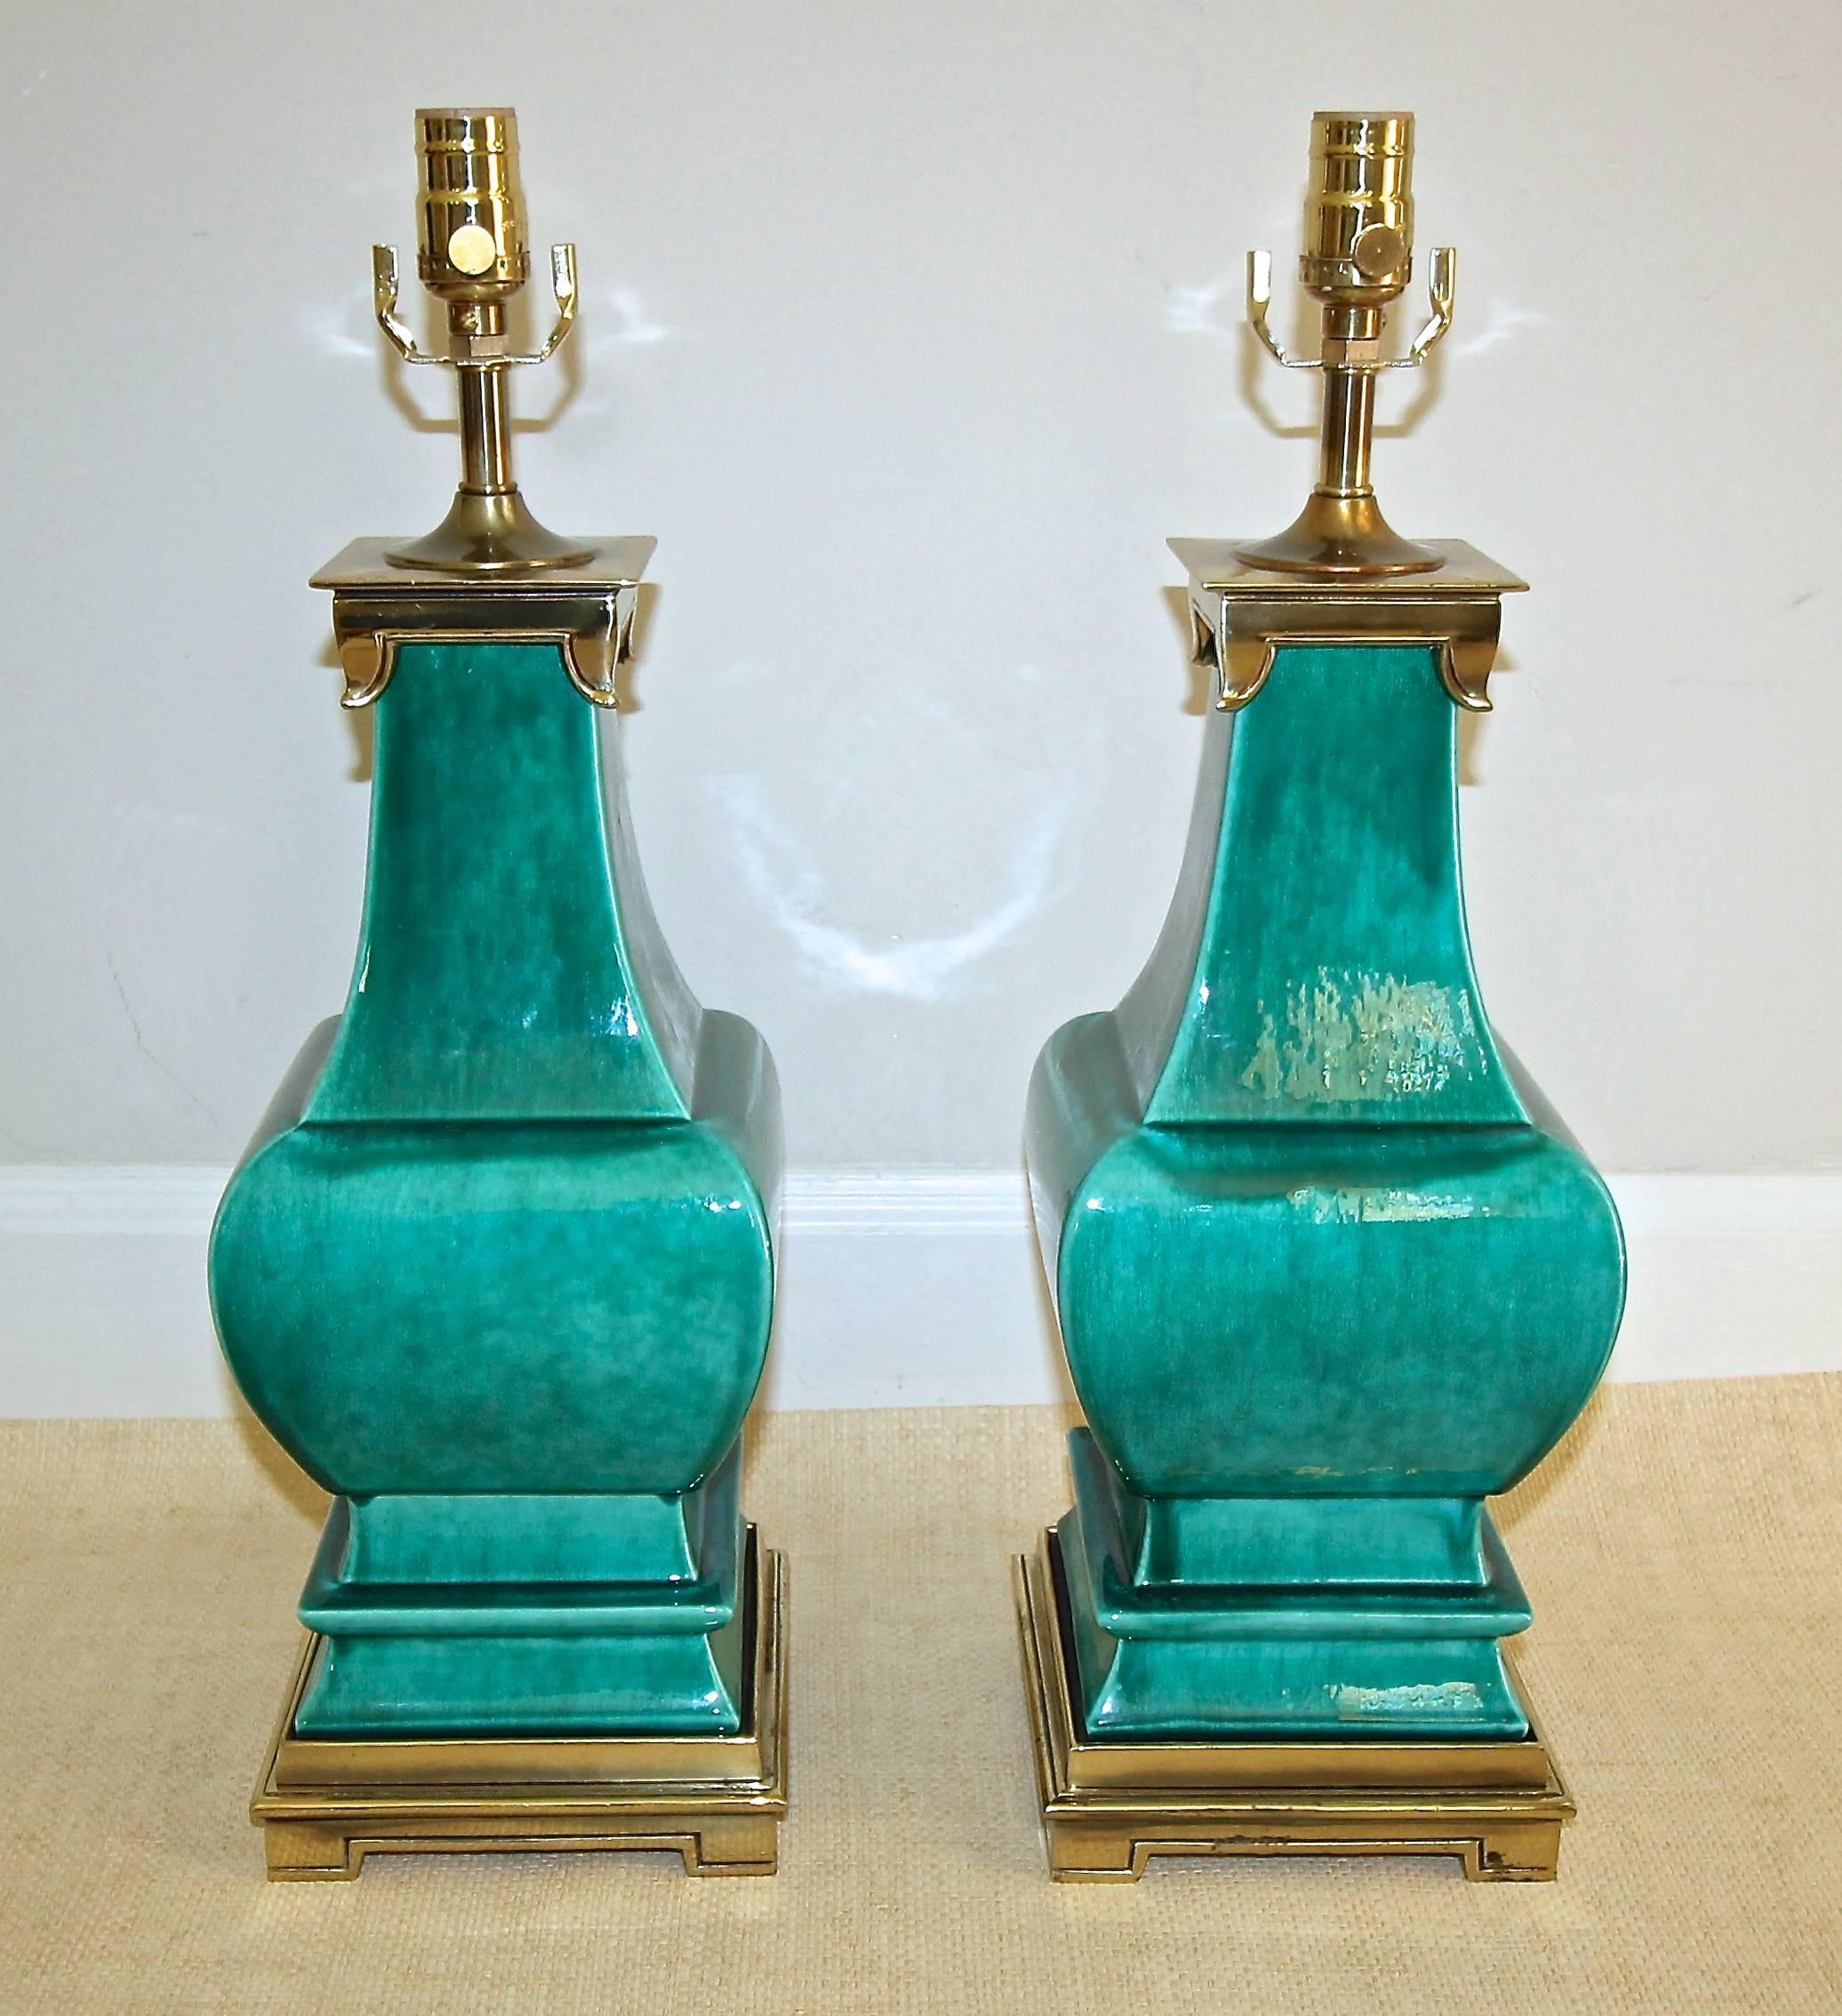 Pair of ceramic lamps by Stiffel in vibrant turquoise crackle glaze and brass finish fittings in the Asian taste. Newly rewired.